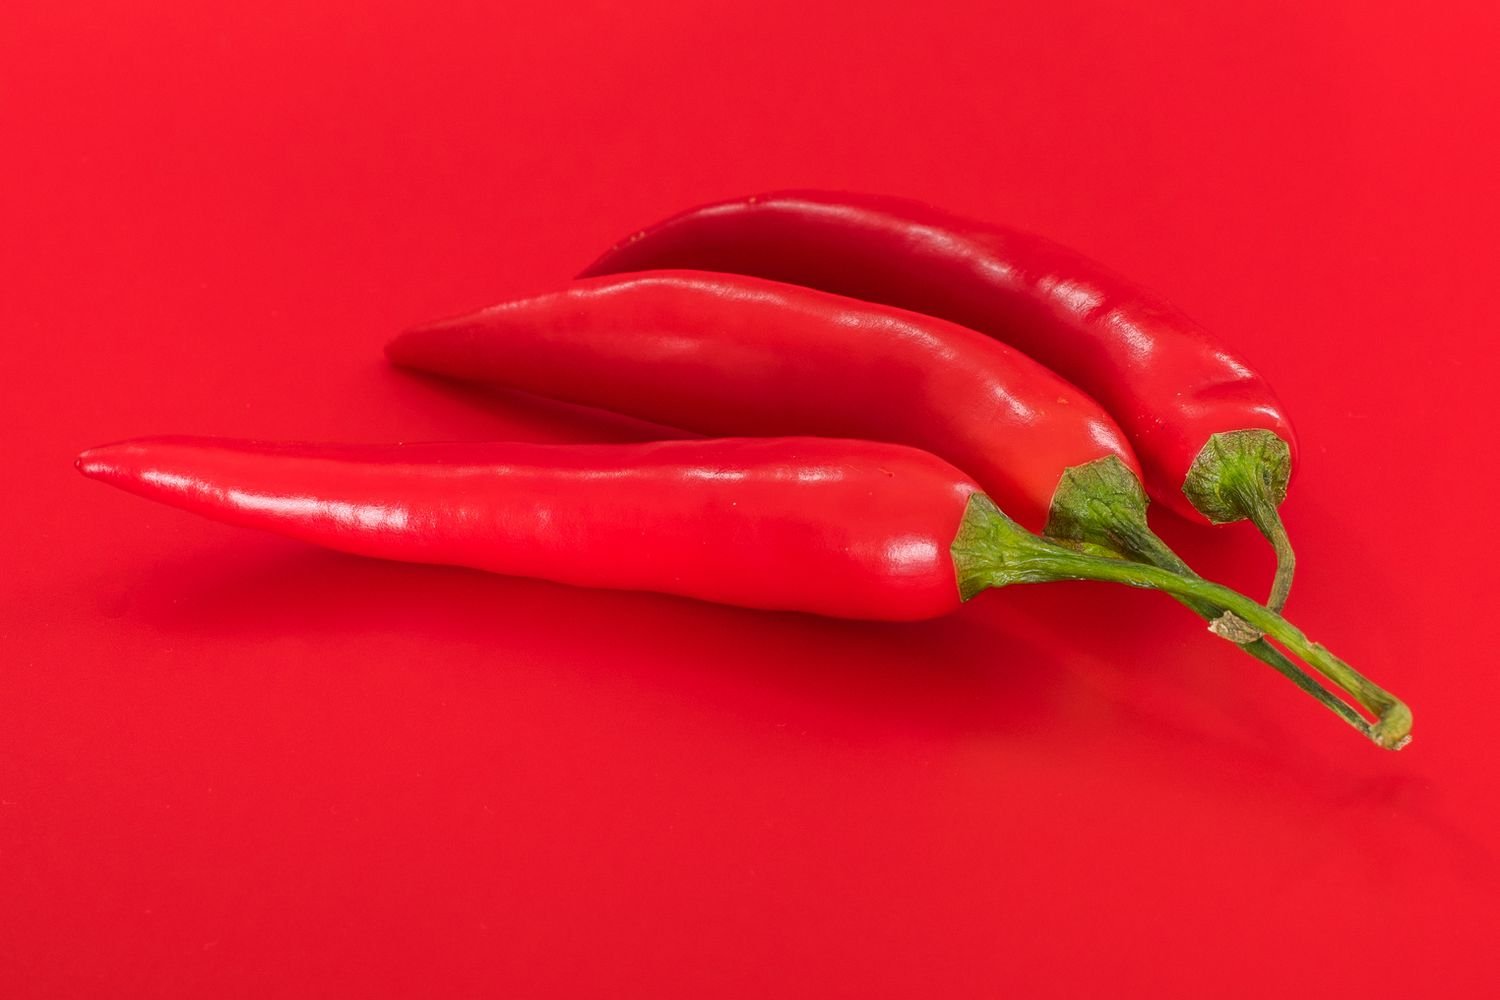 Eating Chili Peppers May Help You Live Longer—and 8 More Health Perks of This Spicy Superfood